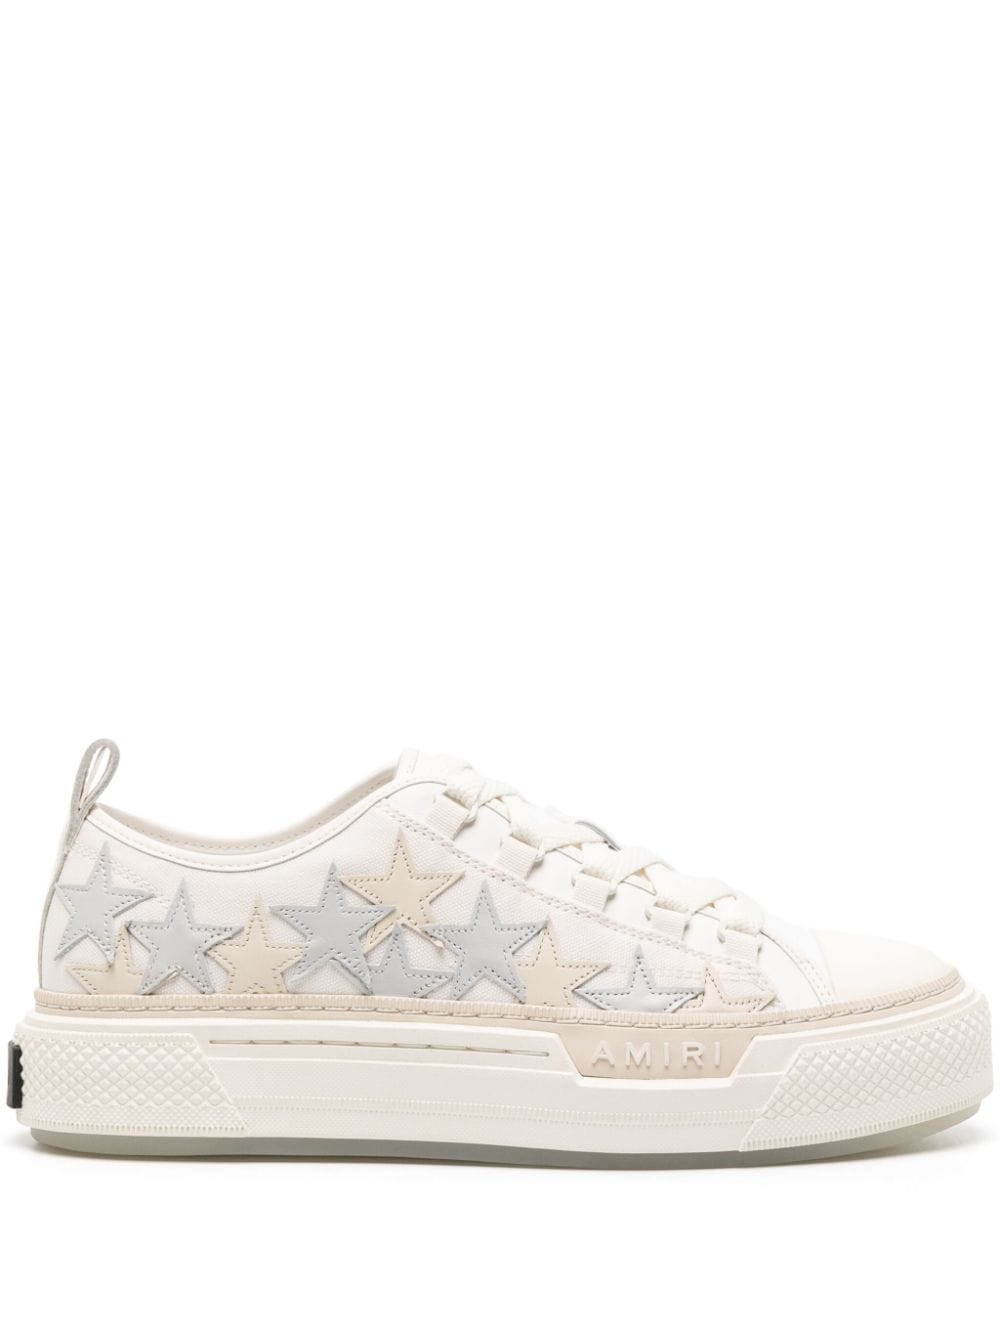 Stars Court canvas sneakers